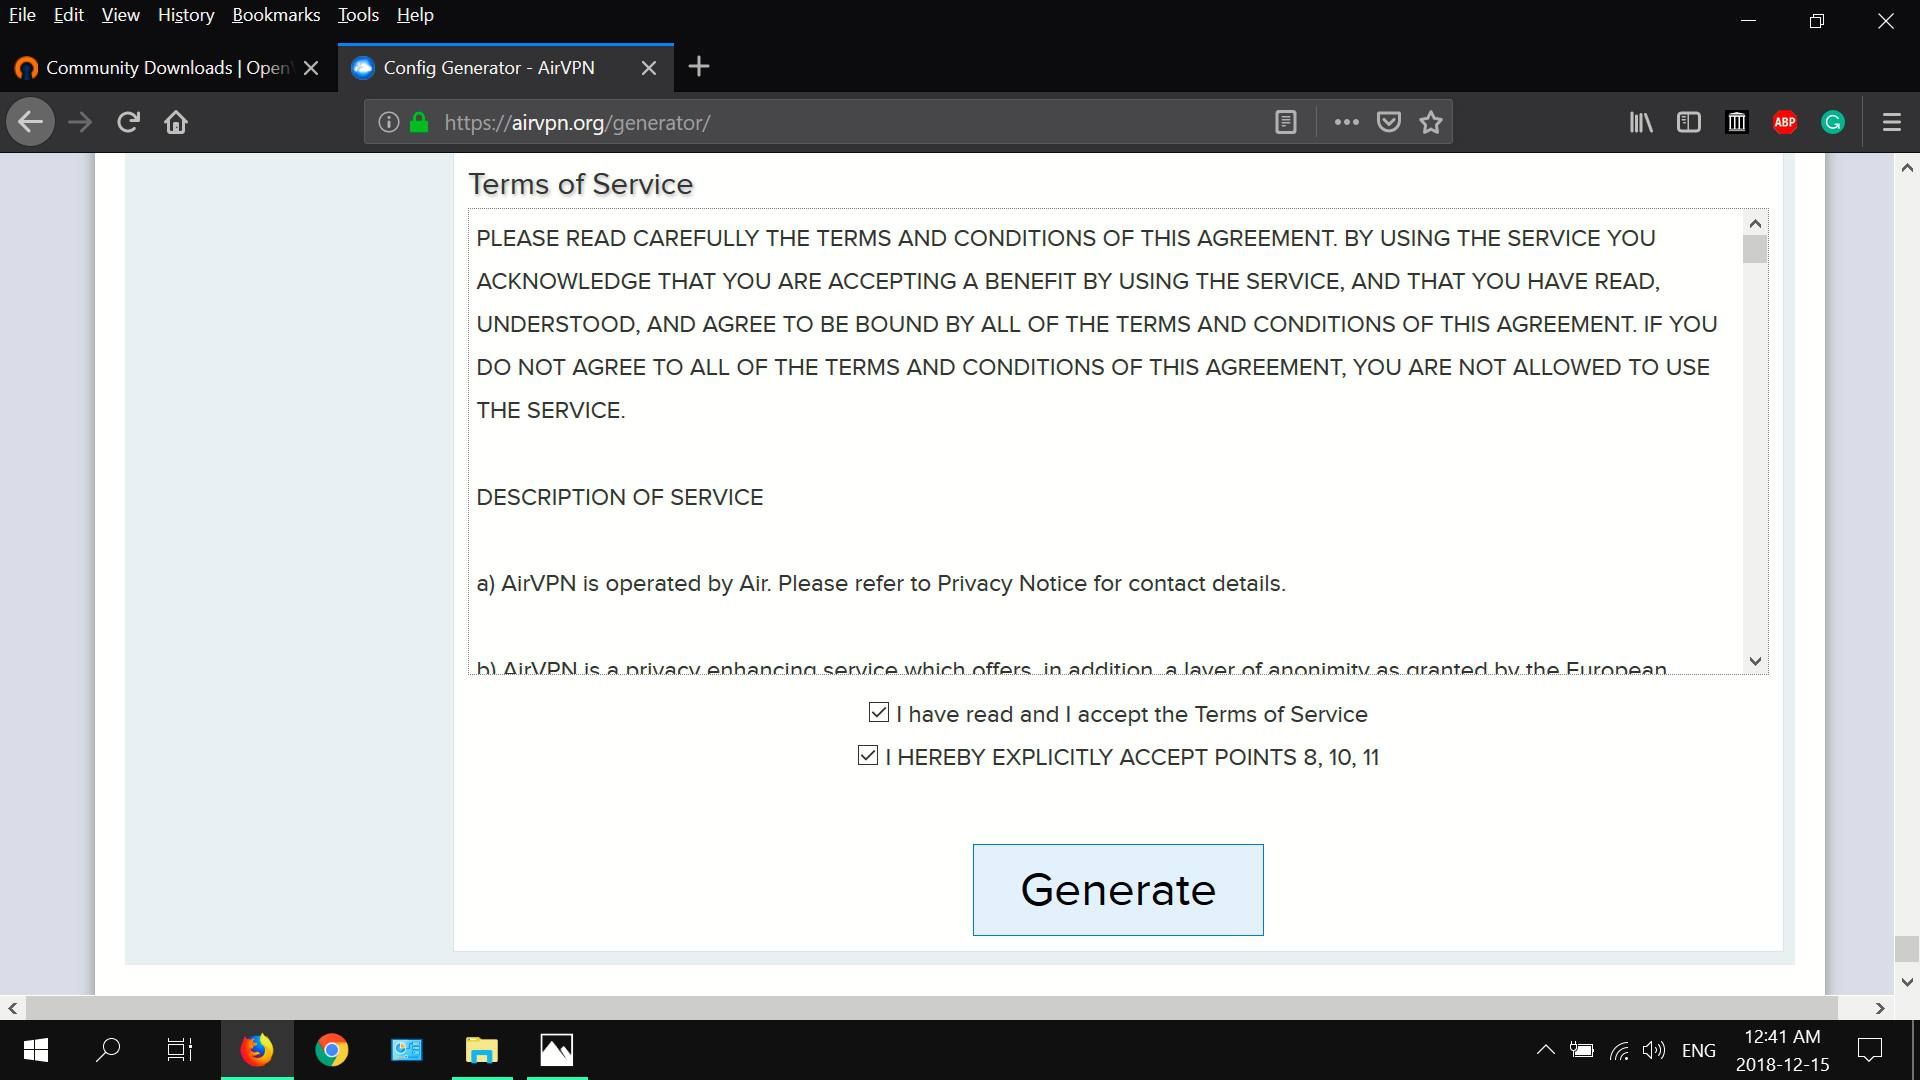 Скриншот AirVPN's terms of service agreement.